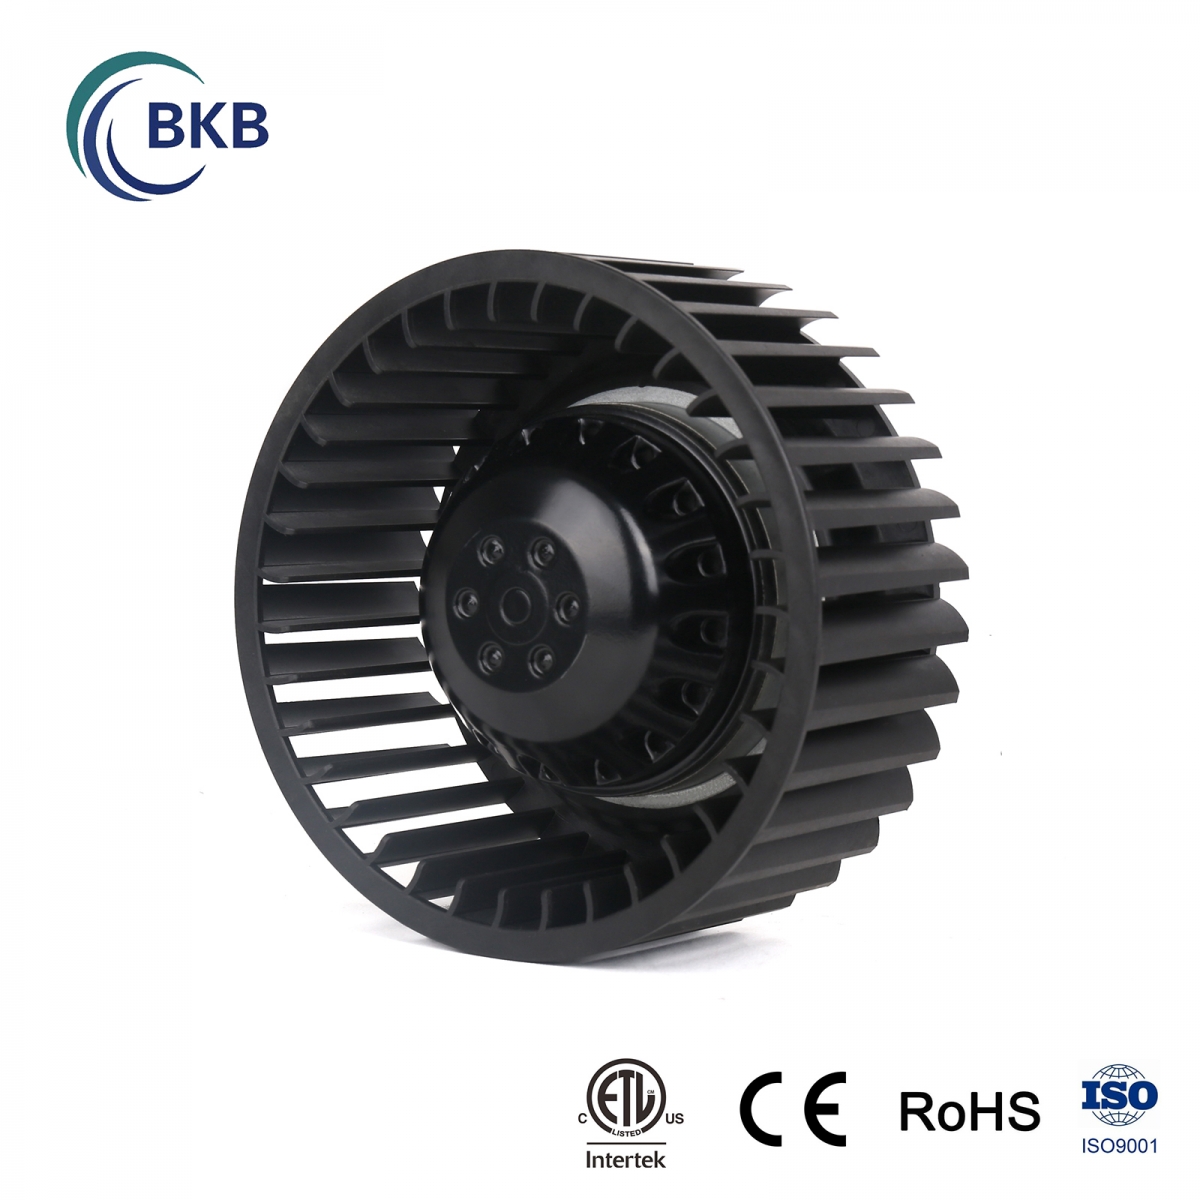 Plastic forward curved centrifugal fans Φ140-SUNLIGHT BLOWER,Centrifugal Fans, Inline Fans,Motors,Backward curved centrifugal fans ,Forward curved centrifugal fans ,inlet fans, EC fans